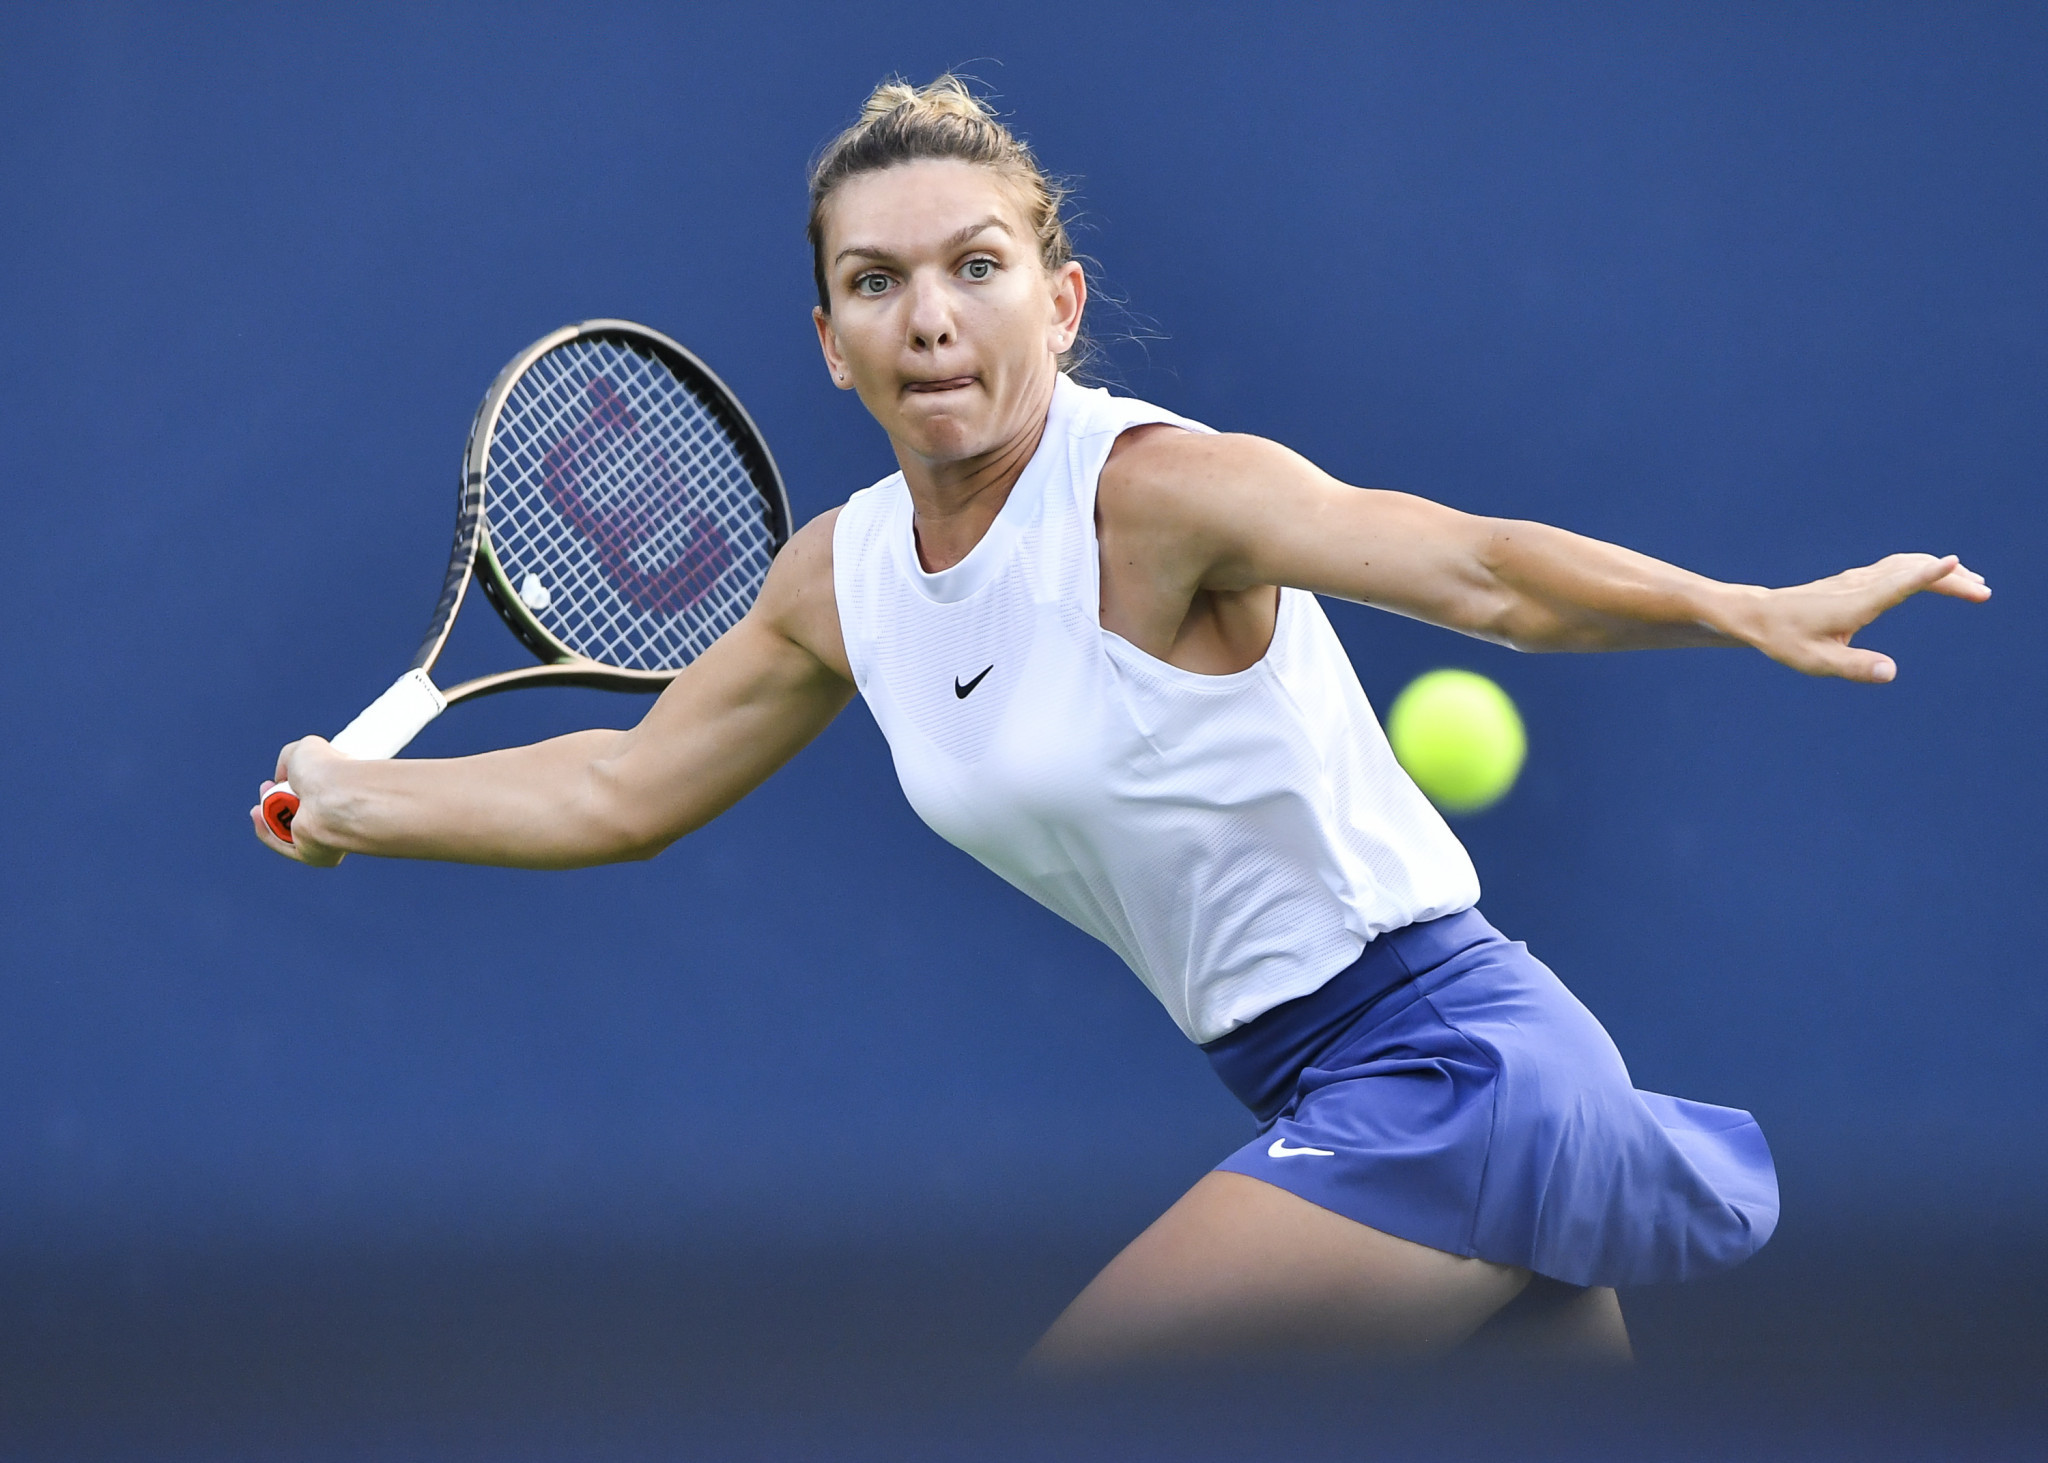 Halep hopes players will get vaccinated to end WTA Tour bubbles